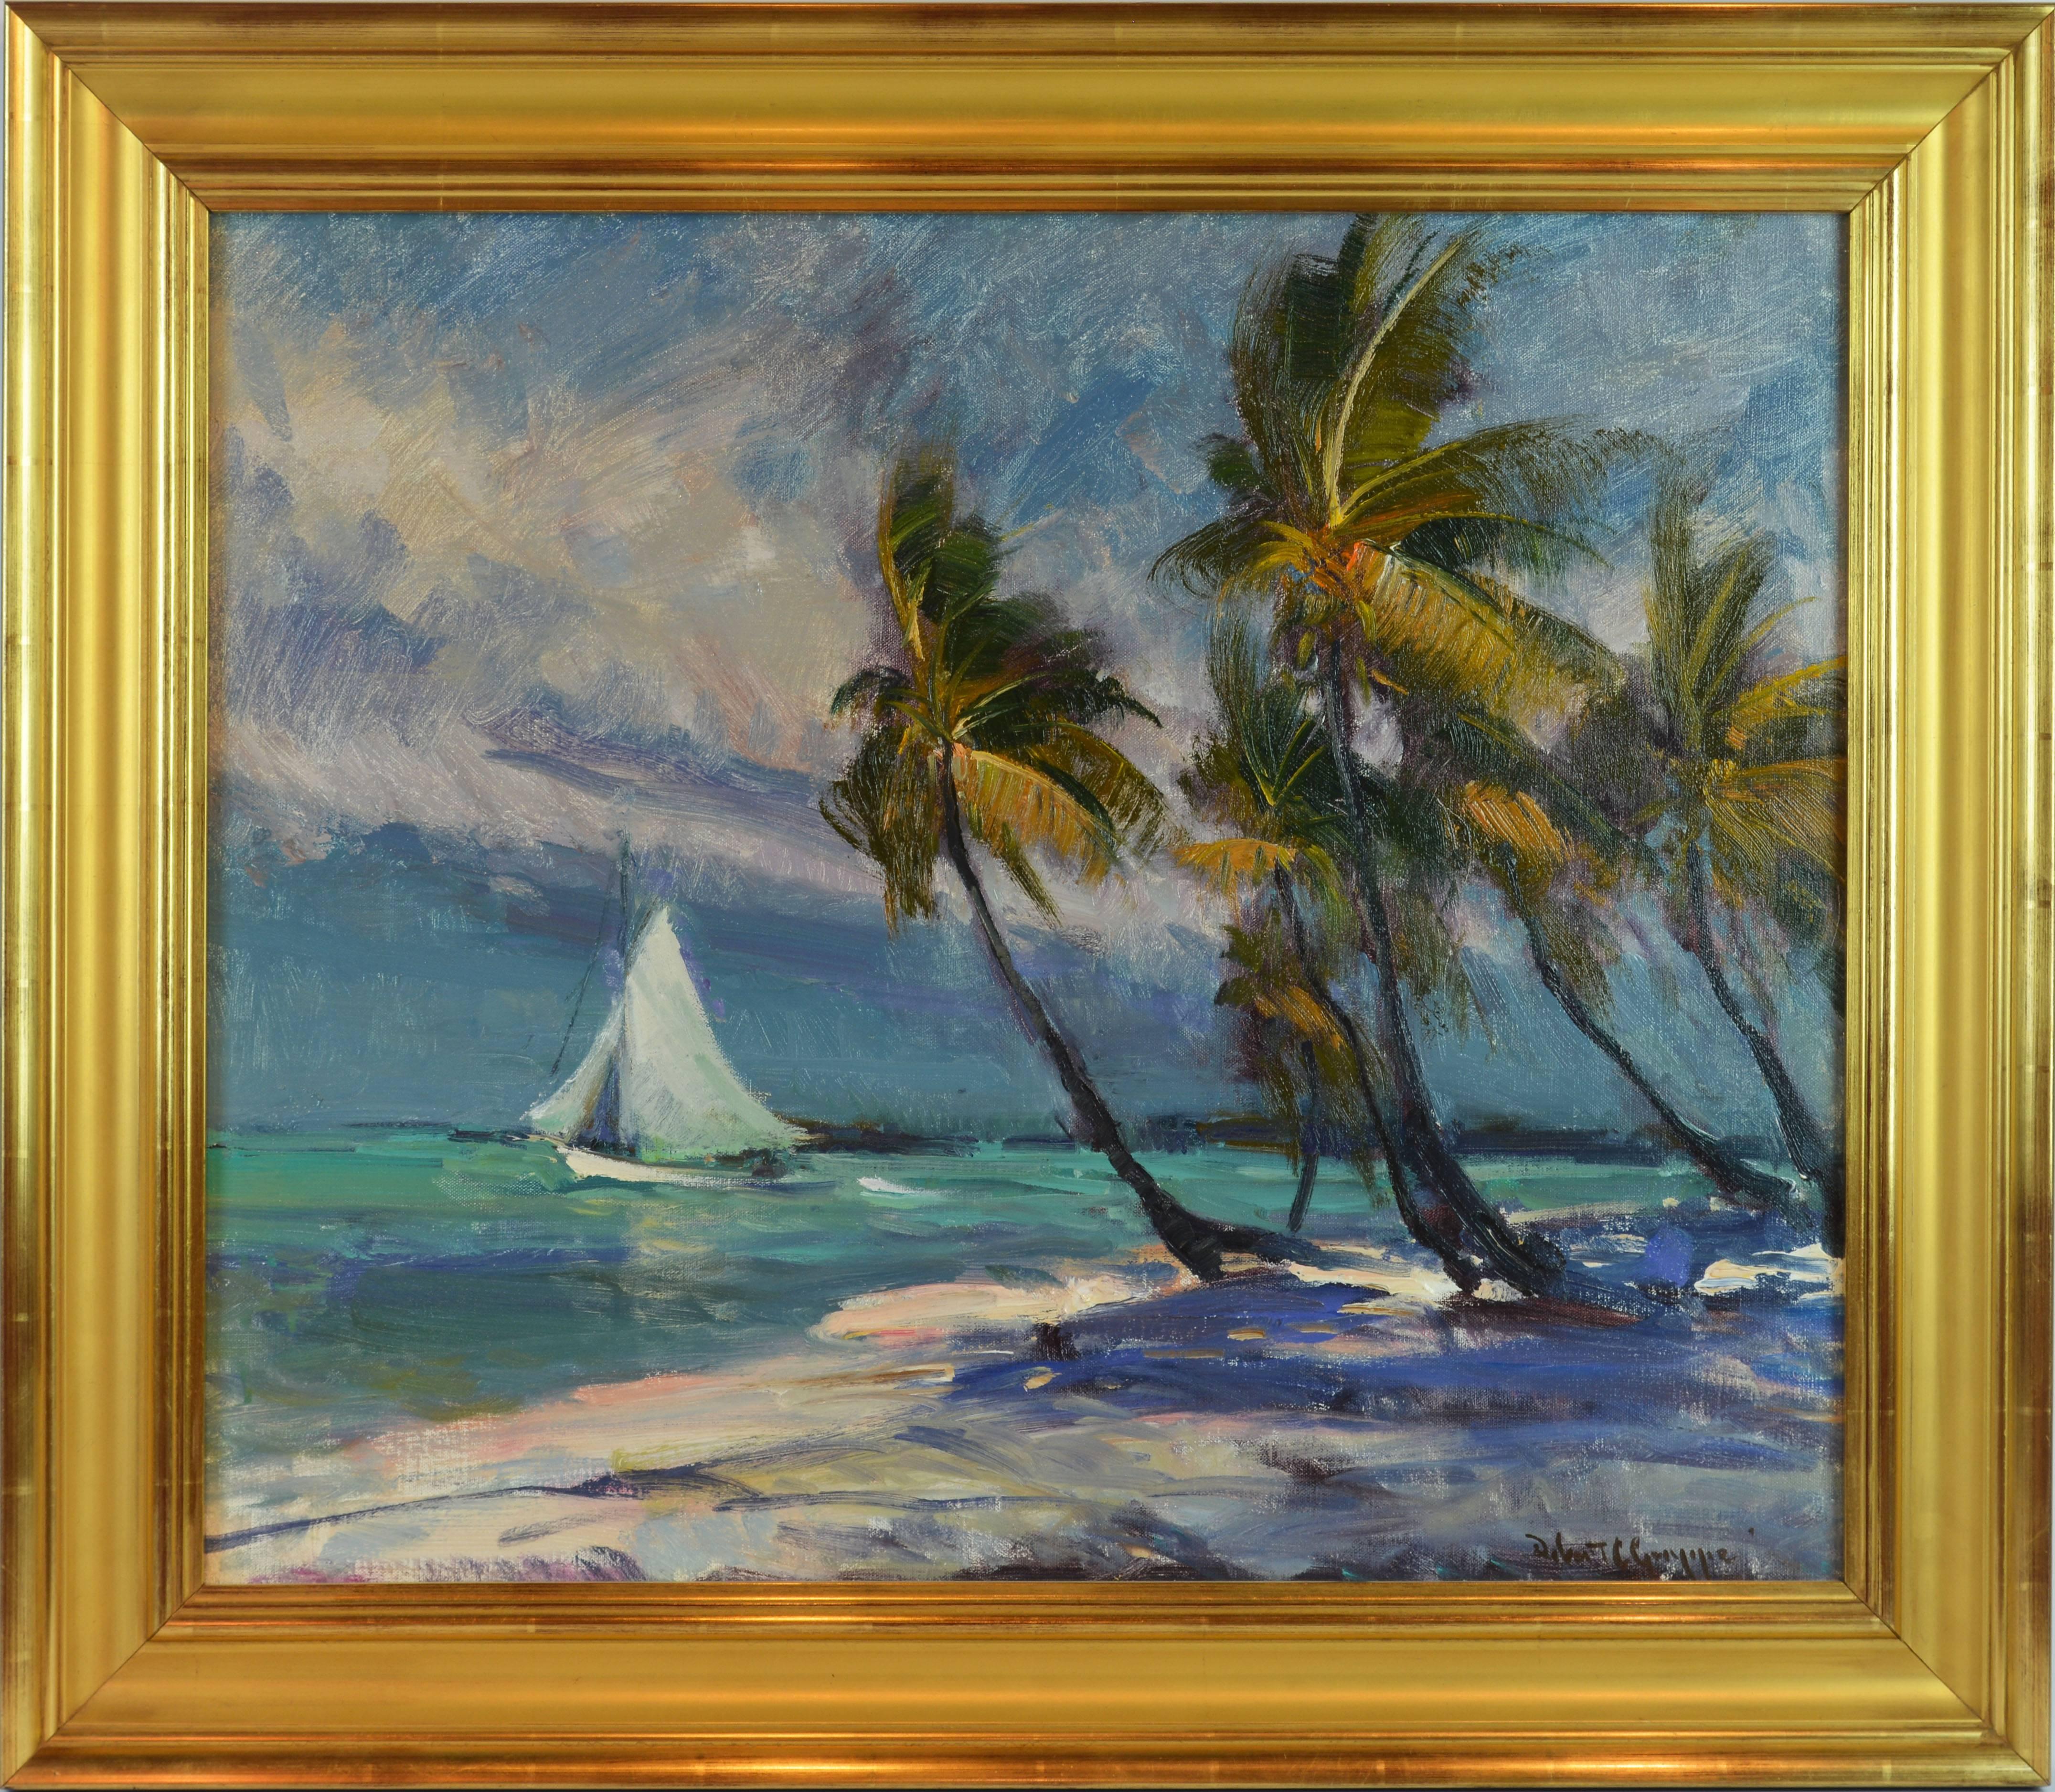 In this vibrant 25 x 30 in. oil on canvas by legendary Robert C, Gruppe, American B. 1944, again discovers the beauty of the Florida coasts capturing with incredibly light and color a Florida that may soon be history. The painting is housed in a